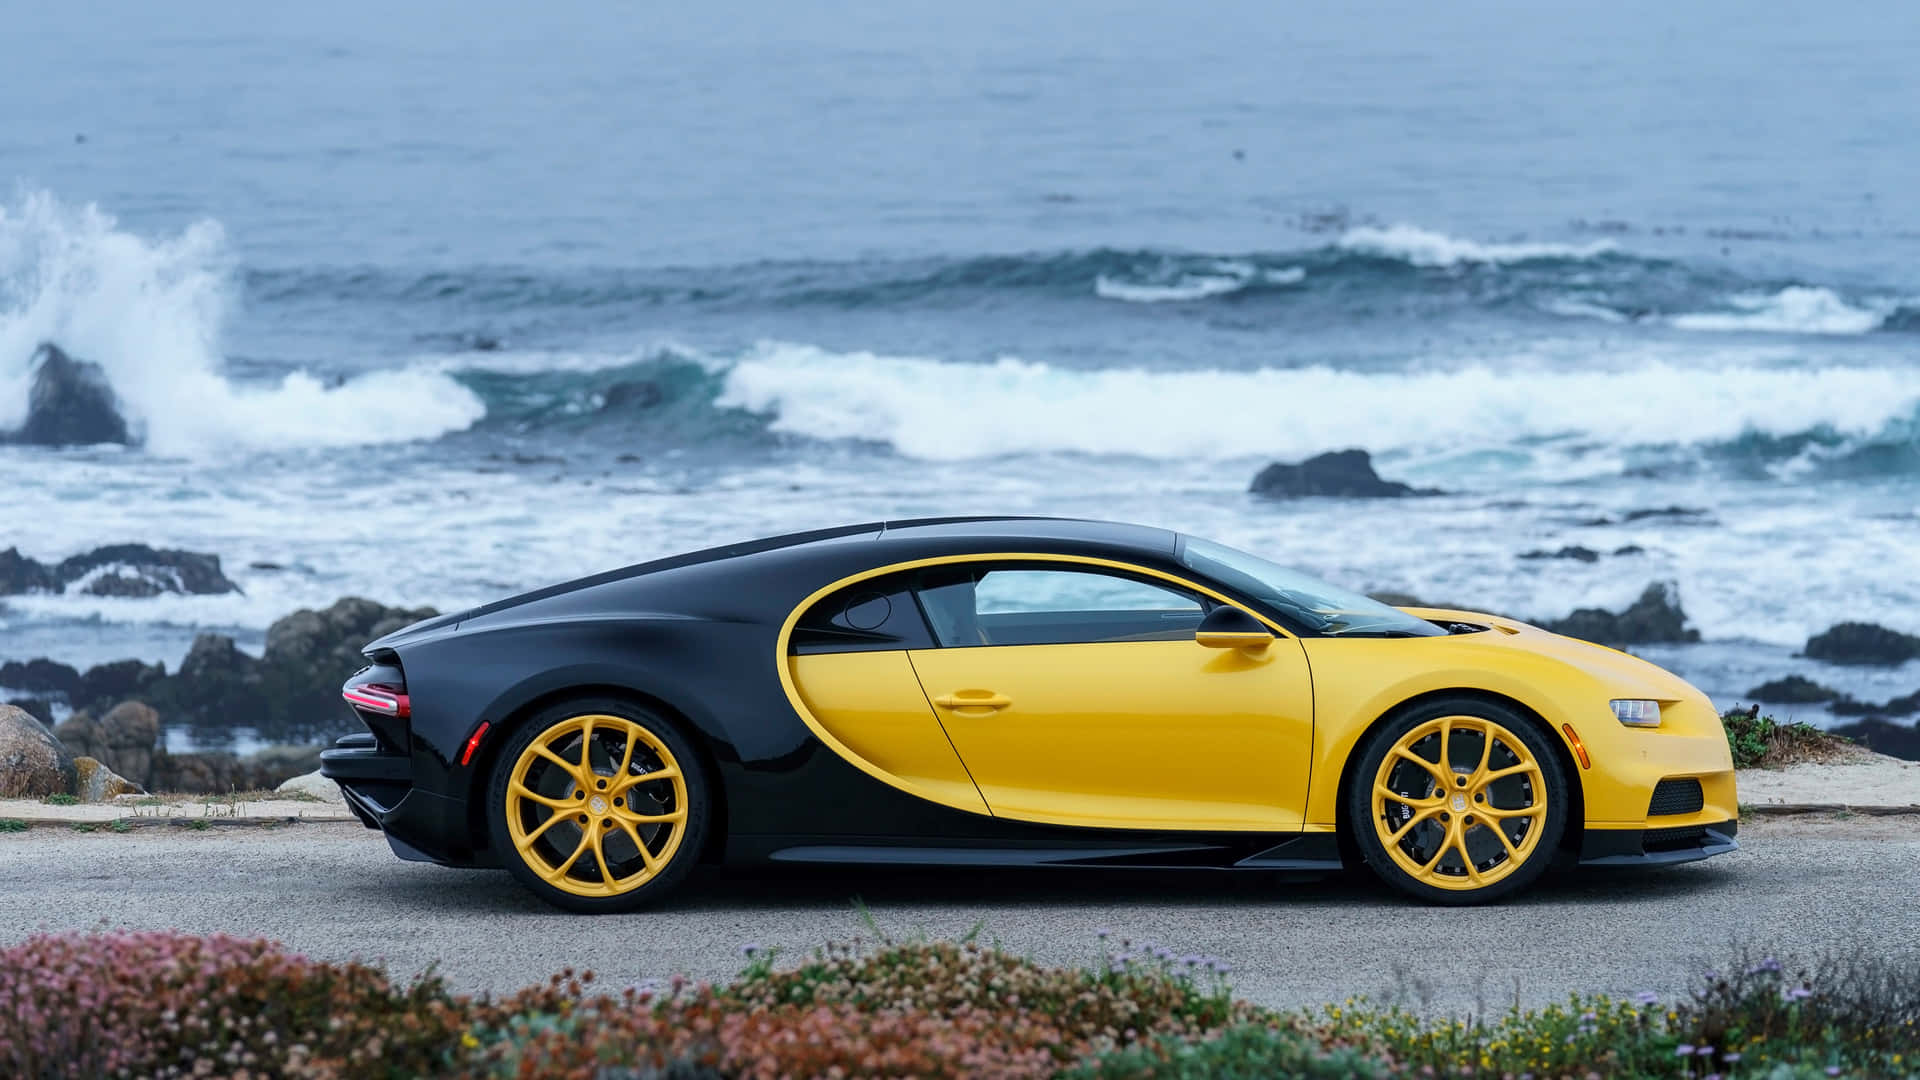 Luxury in Motion - Indulge in the Power and Beauty of the Bugatti 4k Wallpaper